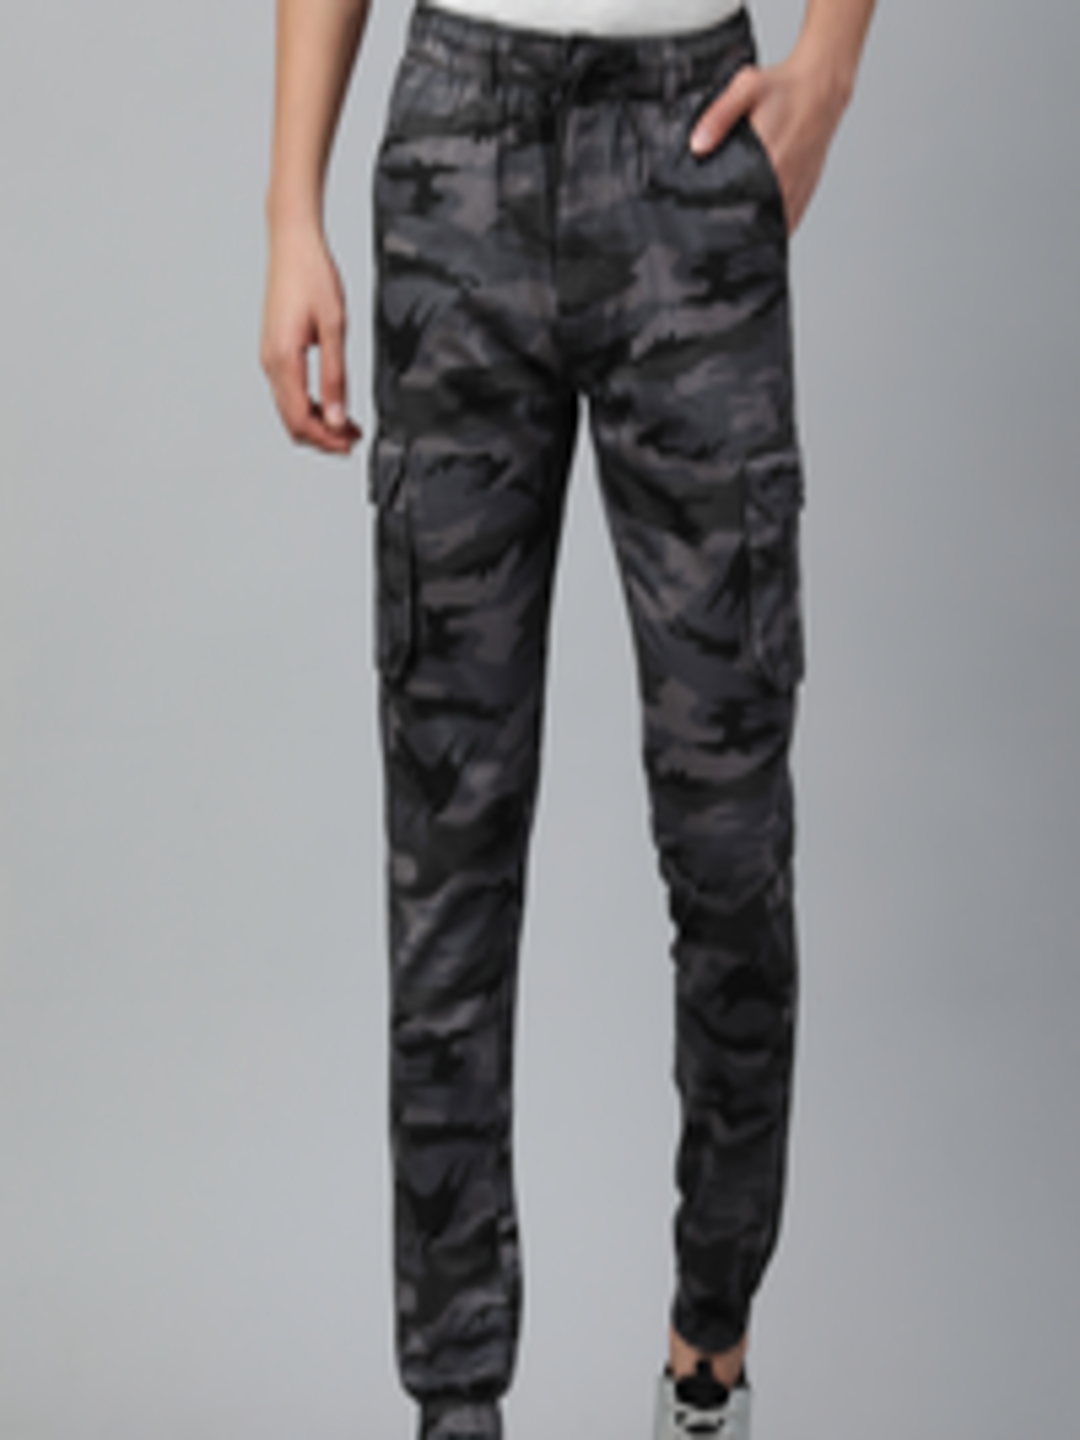 Buy ADBUCKS Camouflage Printed Cargo Style Joggers - Trousers for Men ...